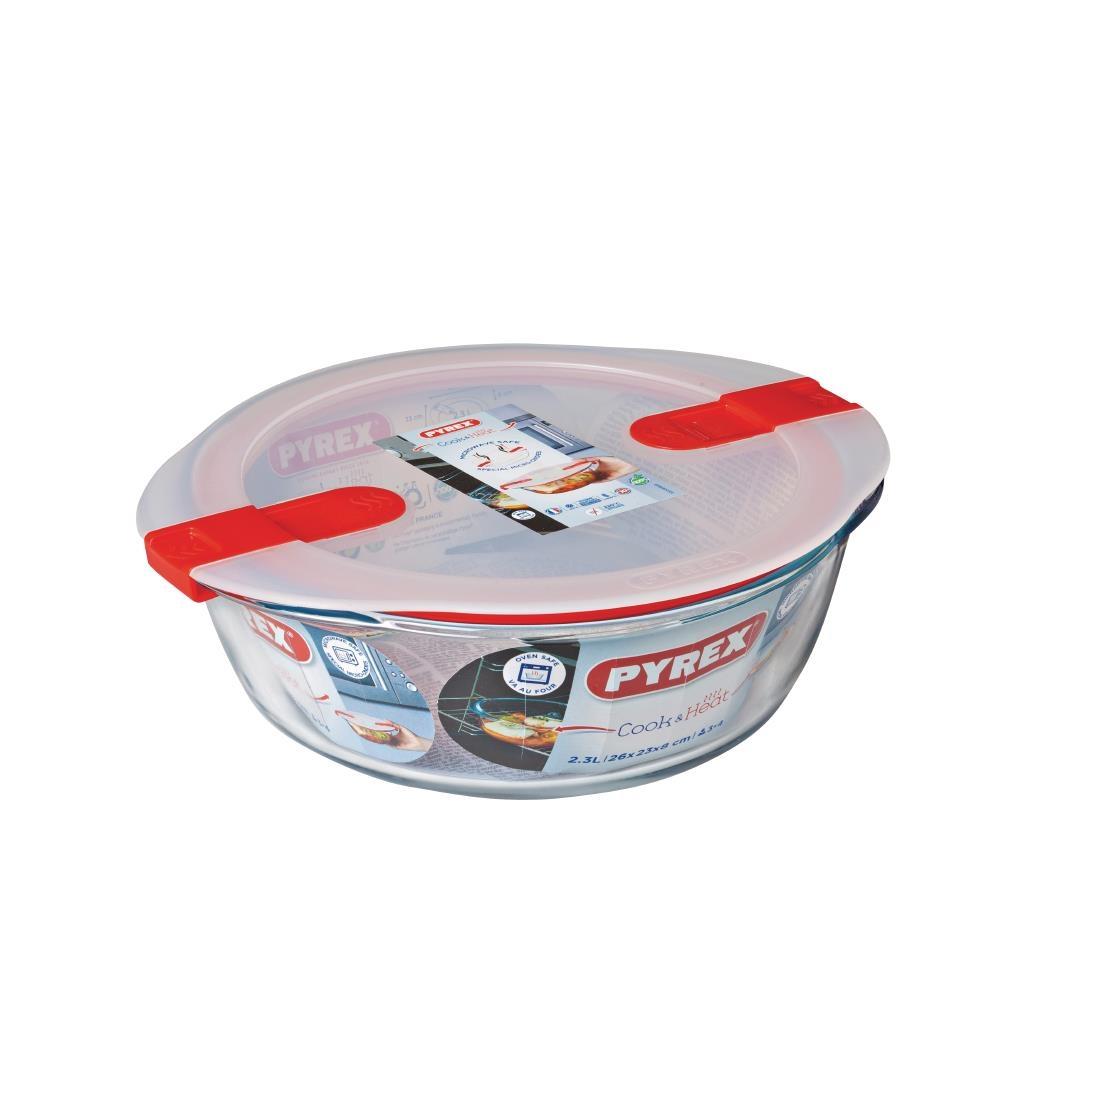 Pyrex Cook and Heat Round Dish with Lid 2.3Ltr - FC362  - 2